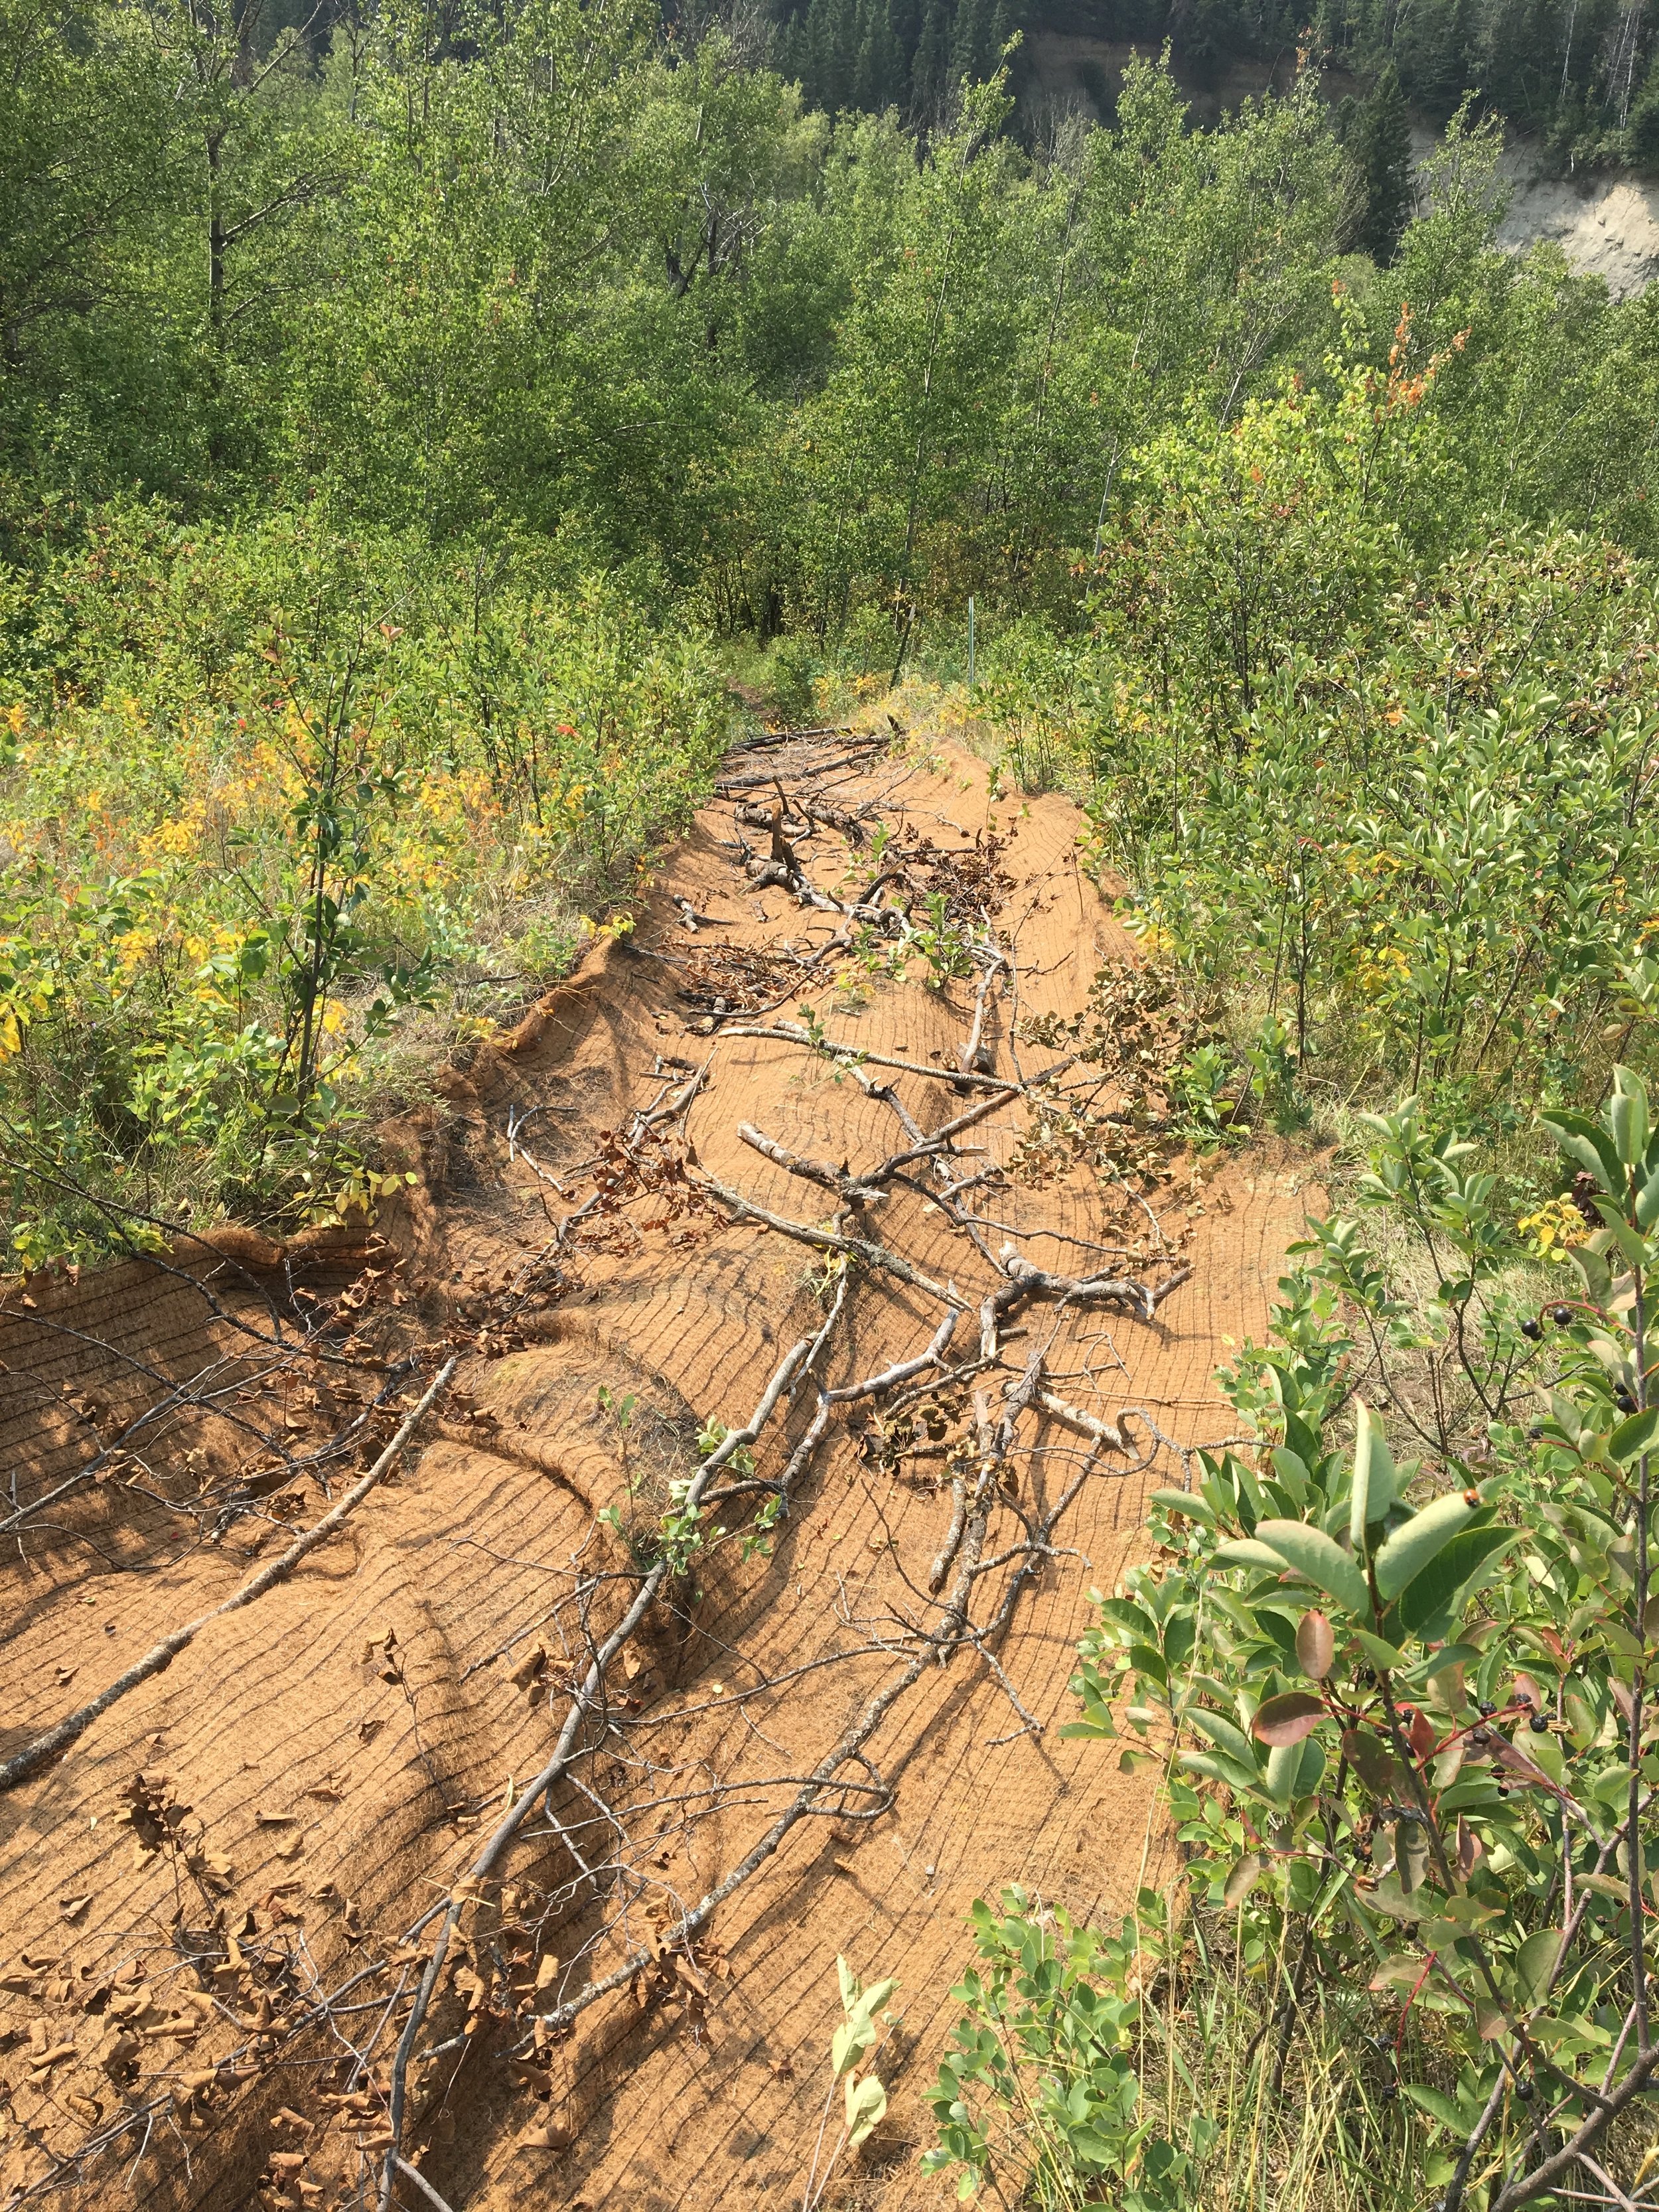 Volunteers restored an old eroded trail at Coates